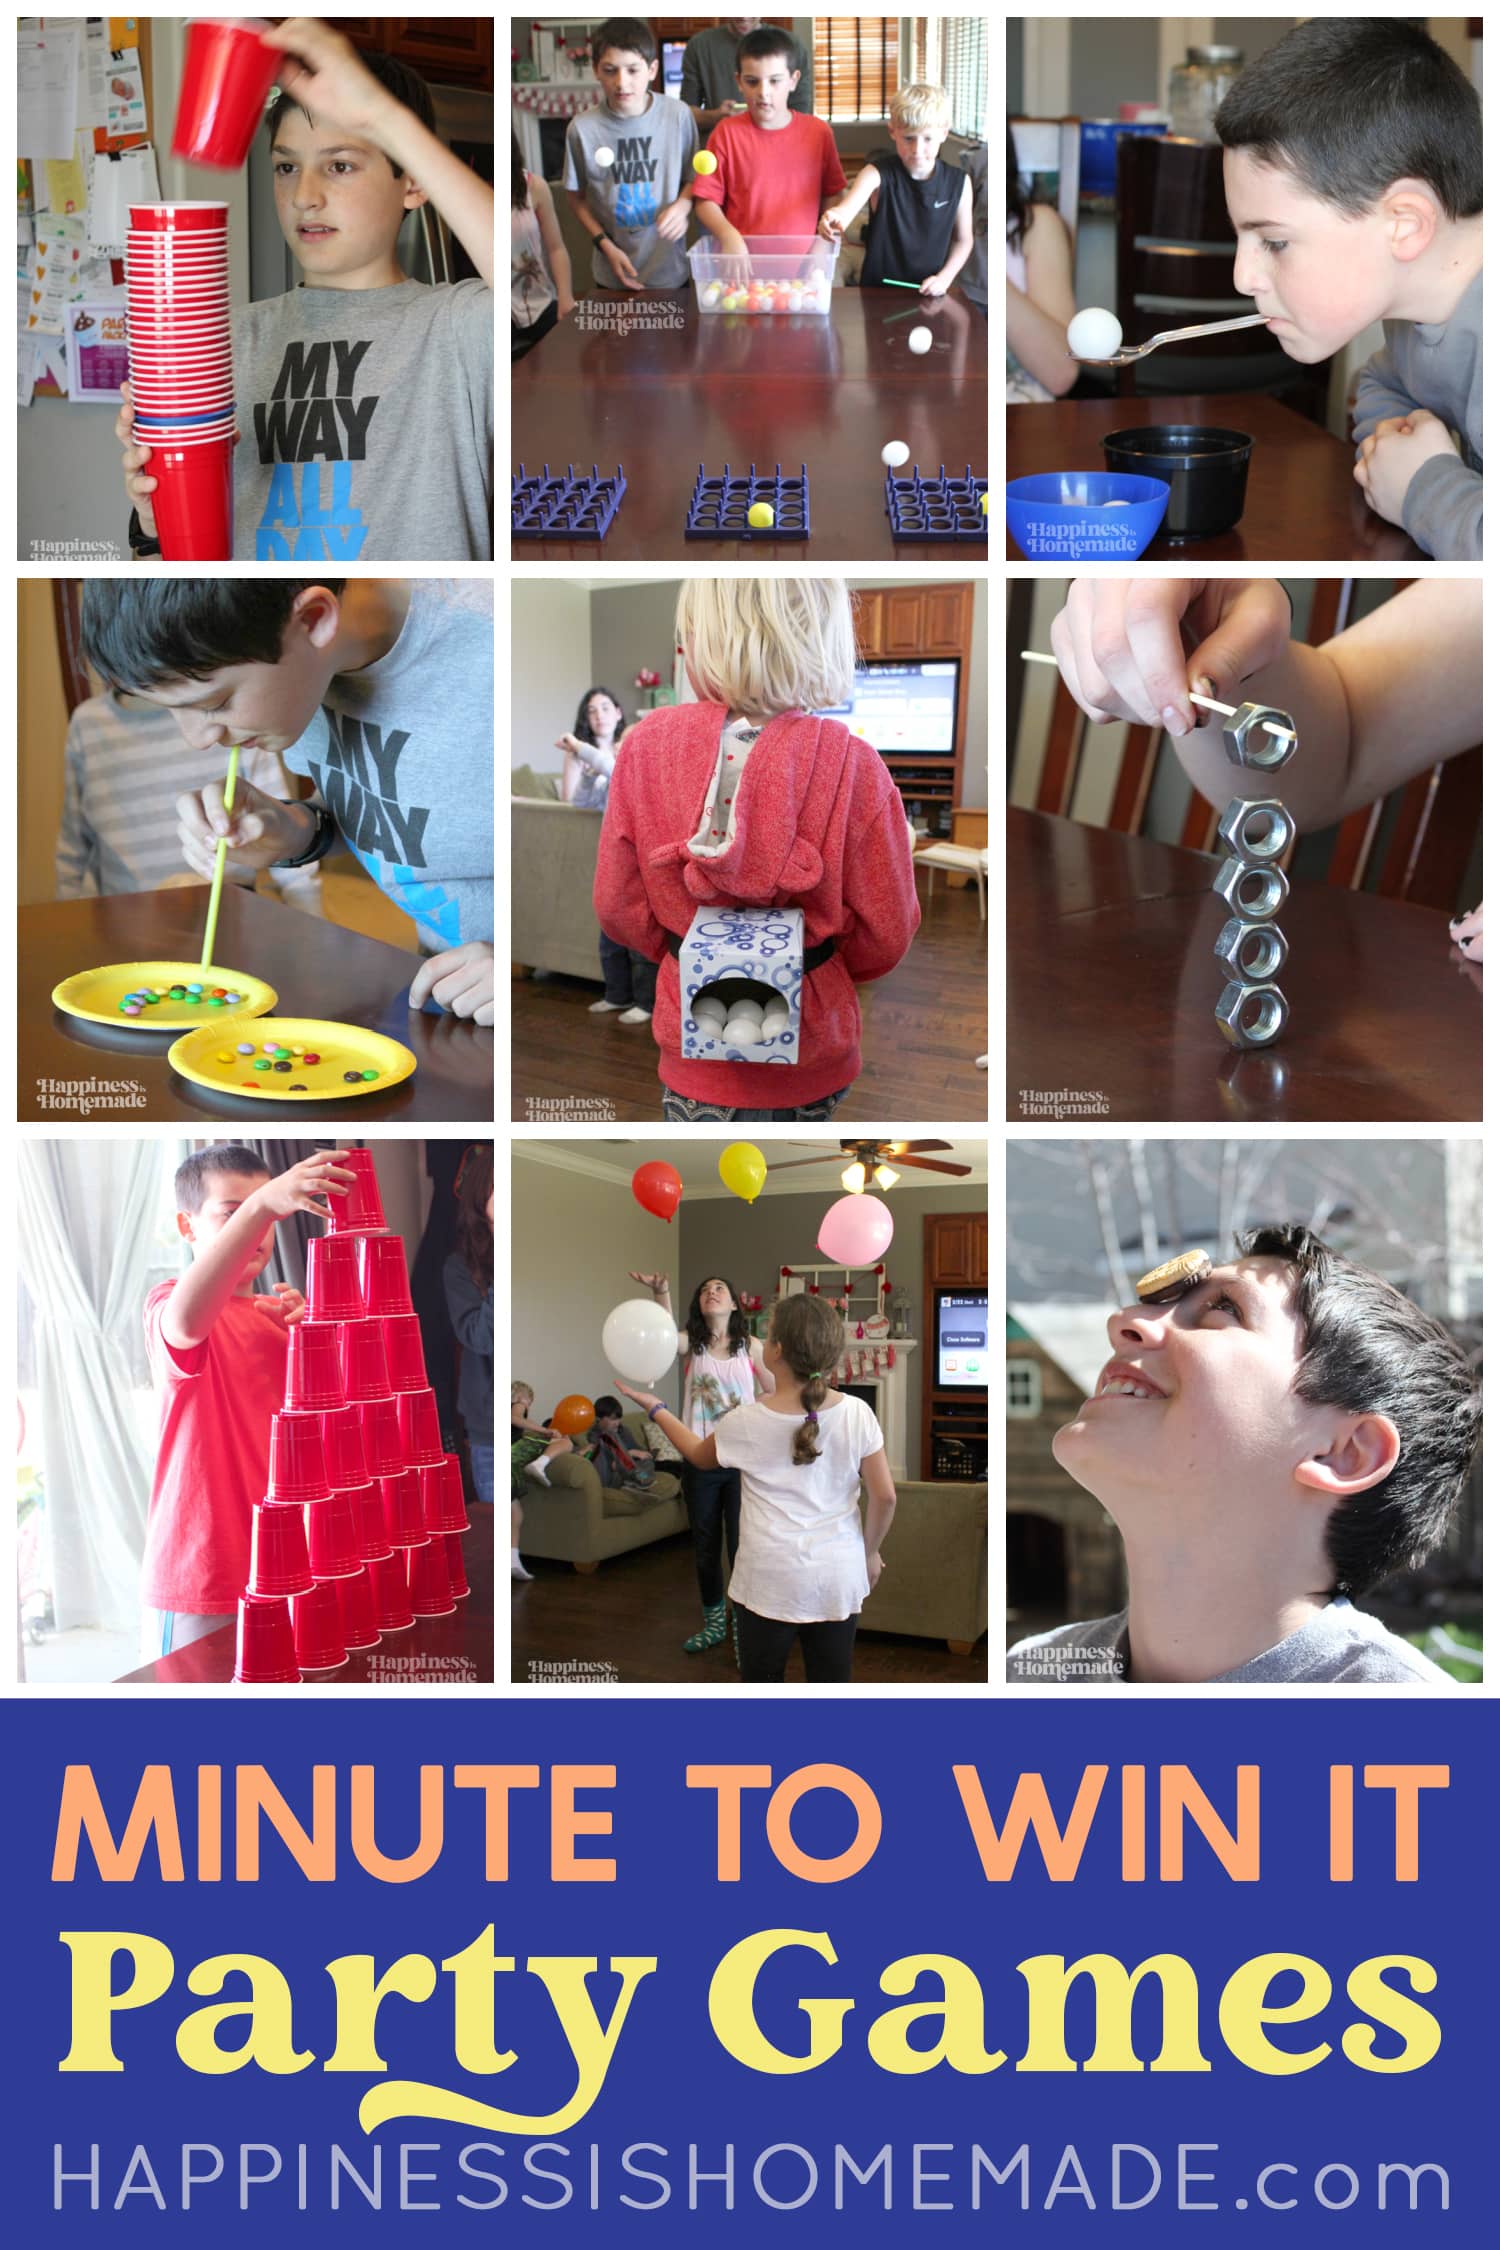 "Minute to Win It Party Games: Fun for All Ages!" text with collage image depicting several Minute to Win It Games for Kids and Adults